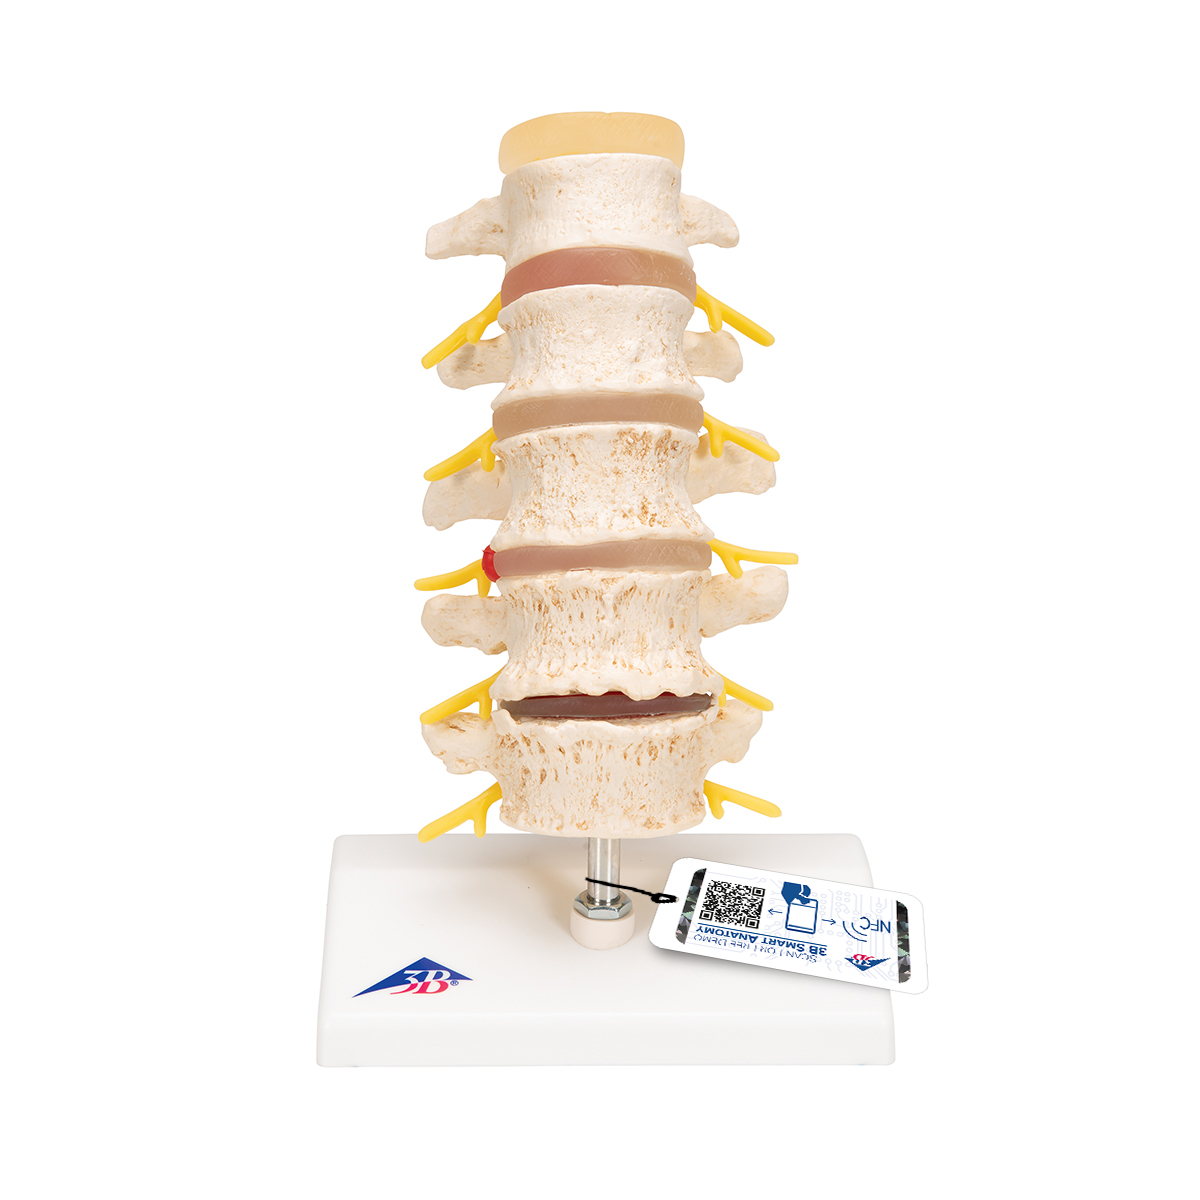 13.4 Height 3B Scientific A76/5 Lumbar Spinal Column with Dorso-Lateral Prolapsed Intervertebral Disc